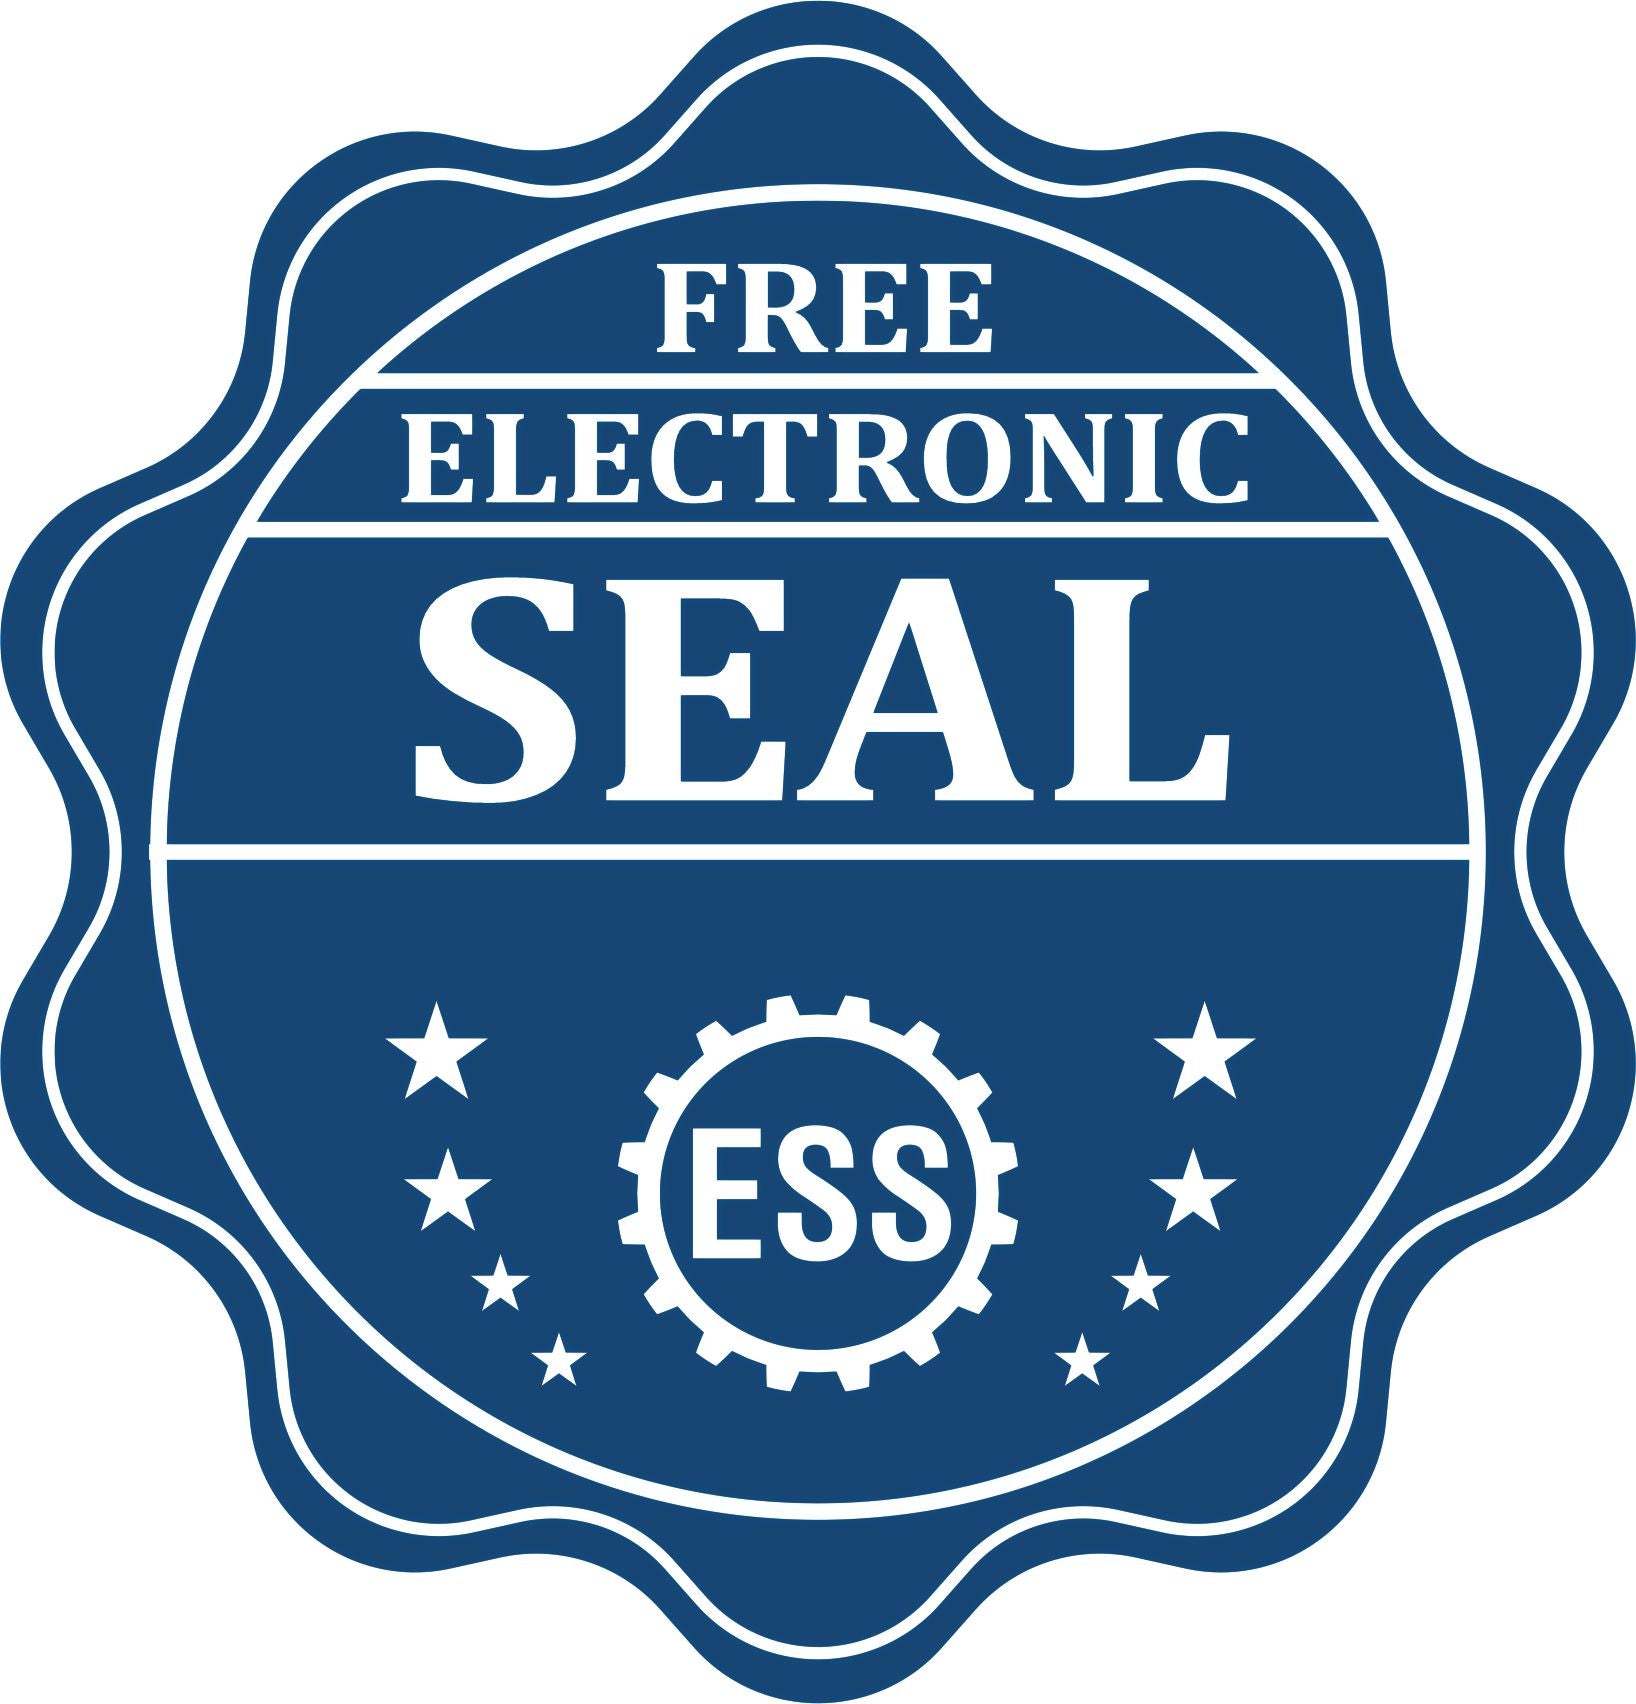 A badge showing a free electronic seal for the Arkansas Professional Engineer Seal Stamp with stars and the ESS gear on the emblem.